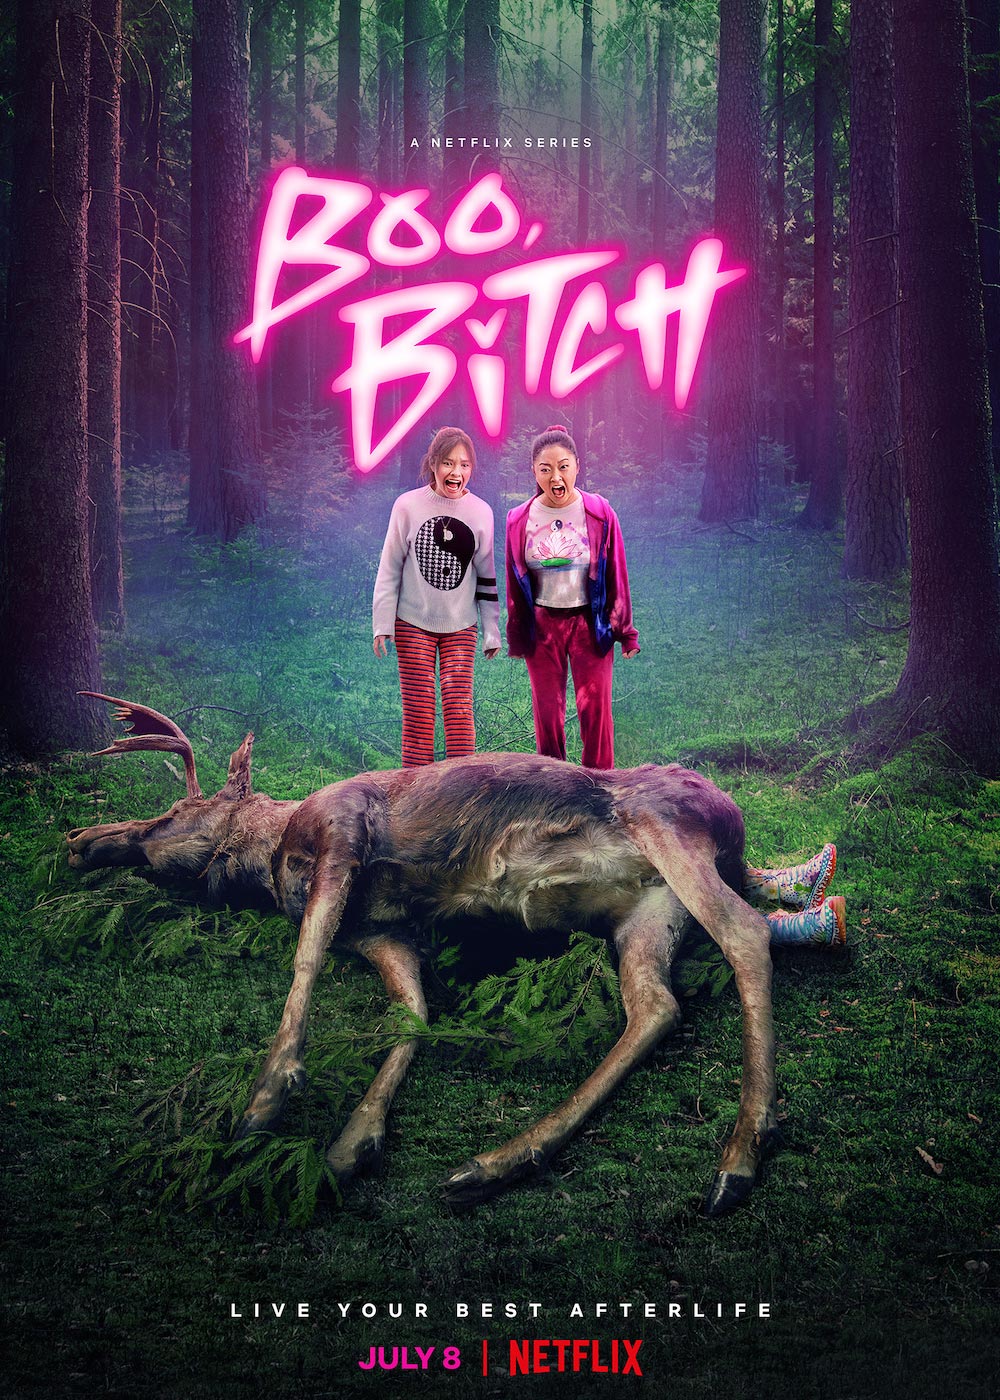 Boo, Bitch TV Series 2022, Official Trailer, Release Date, HD Poster